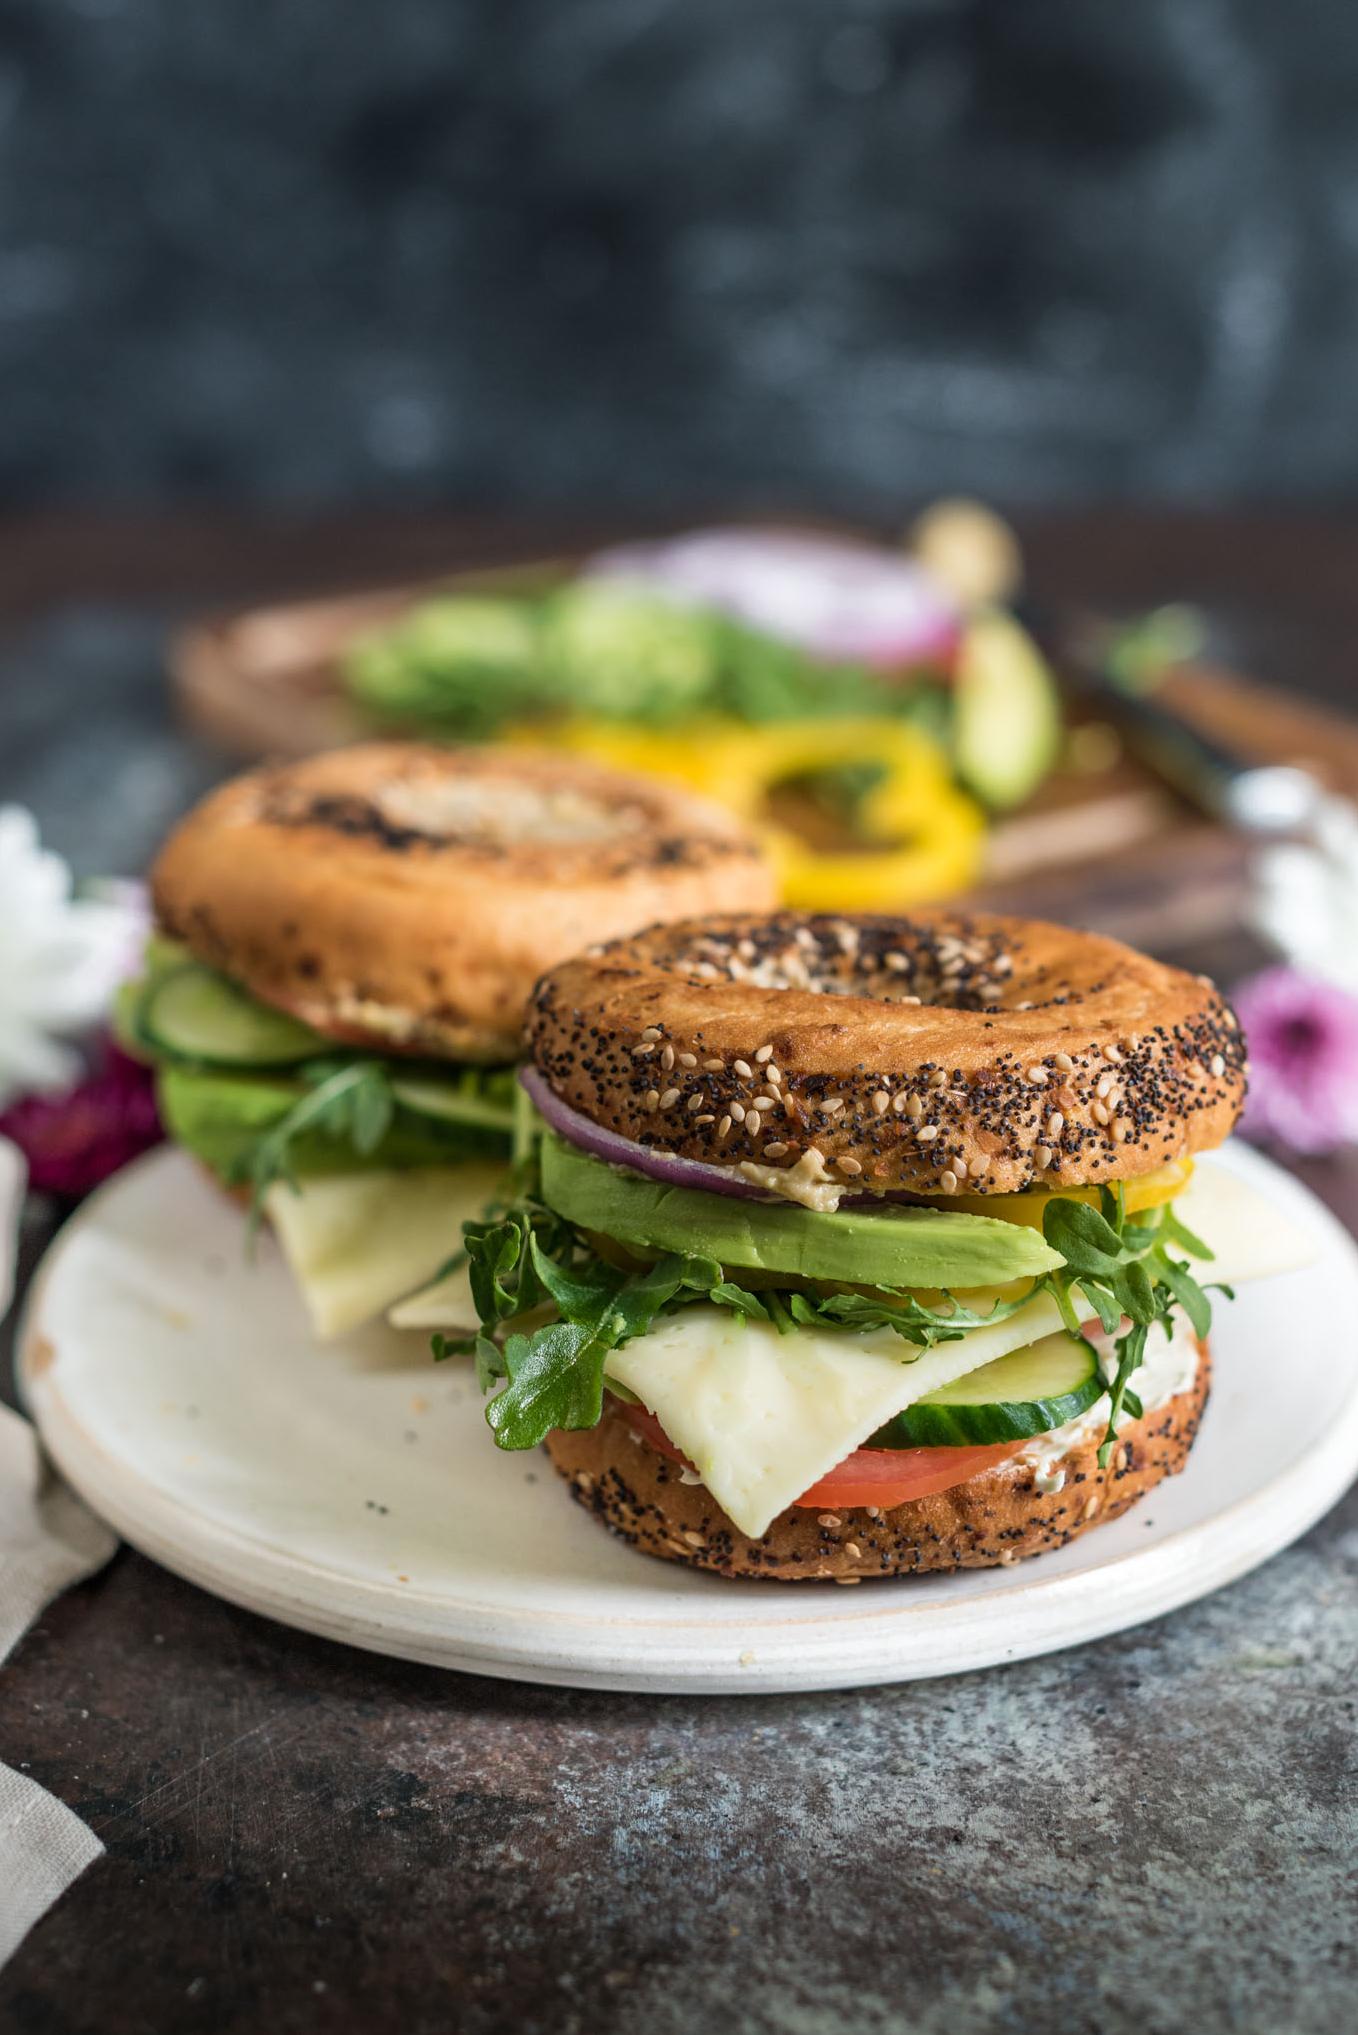  Who says vegetarian food is boring? This bagel sandwich is anything but.